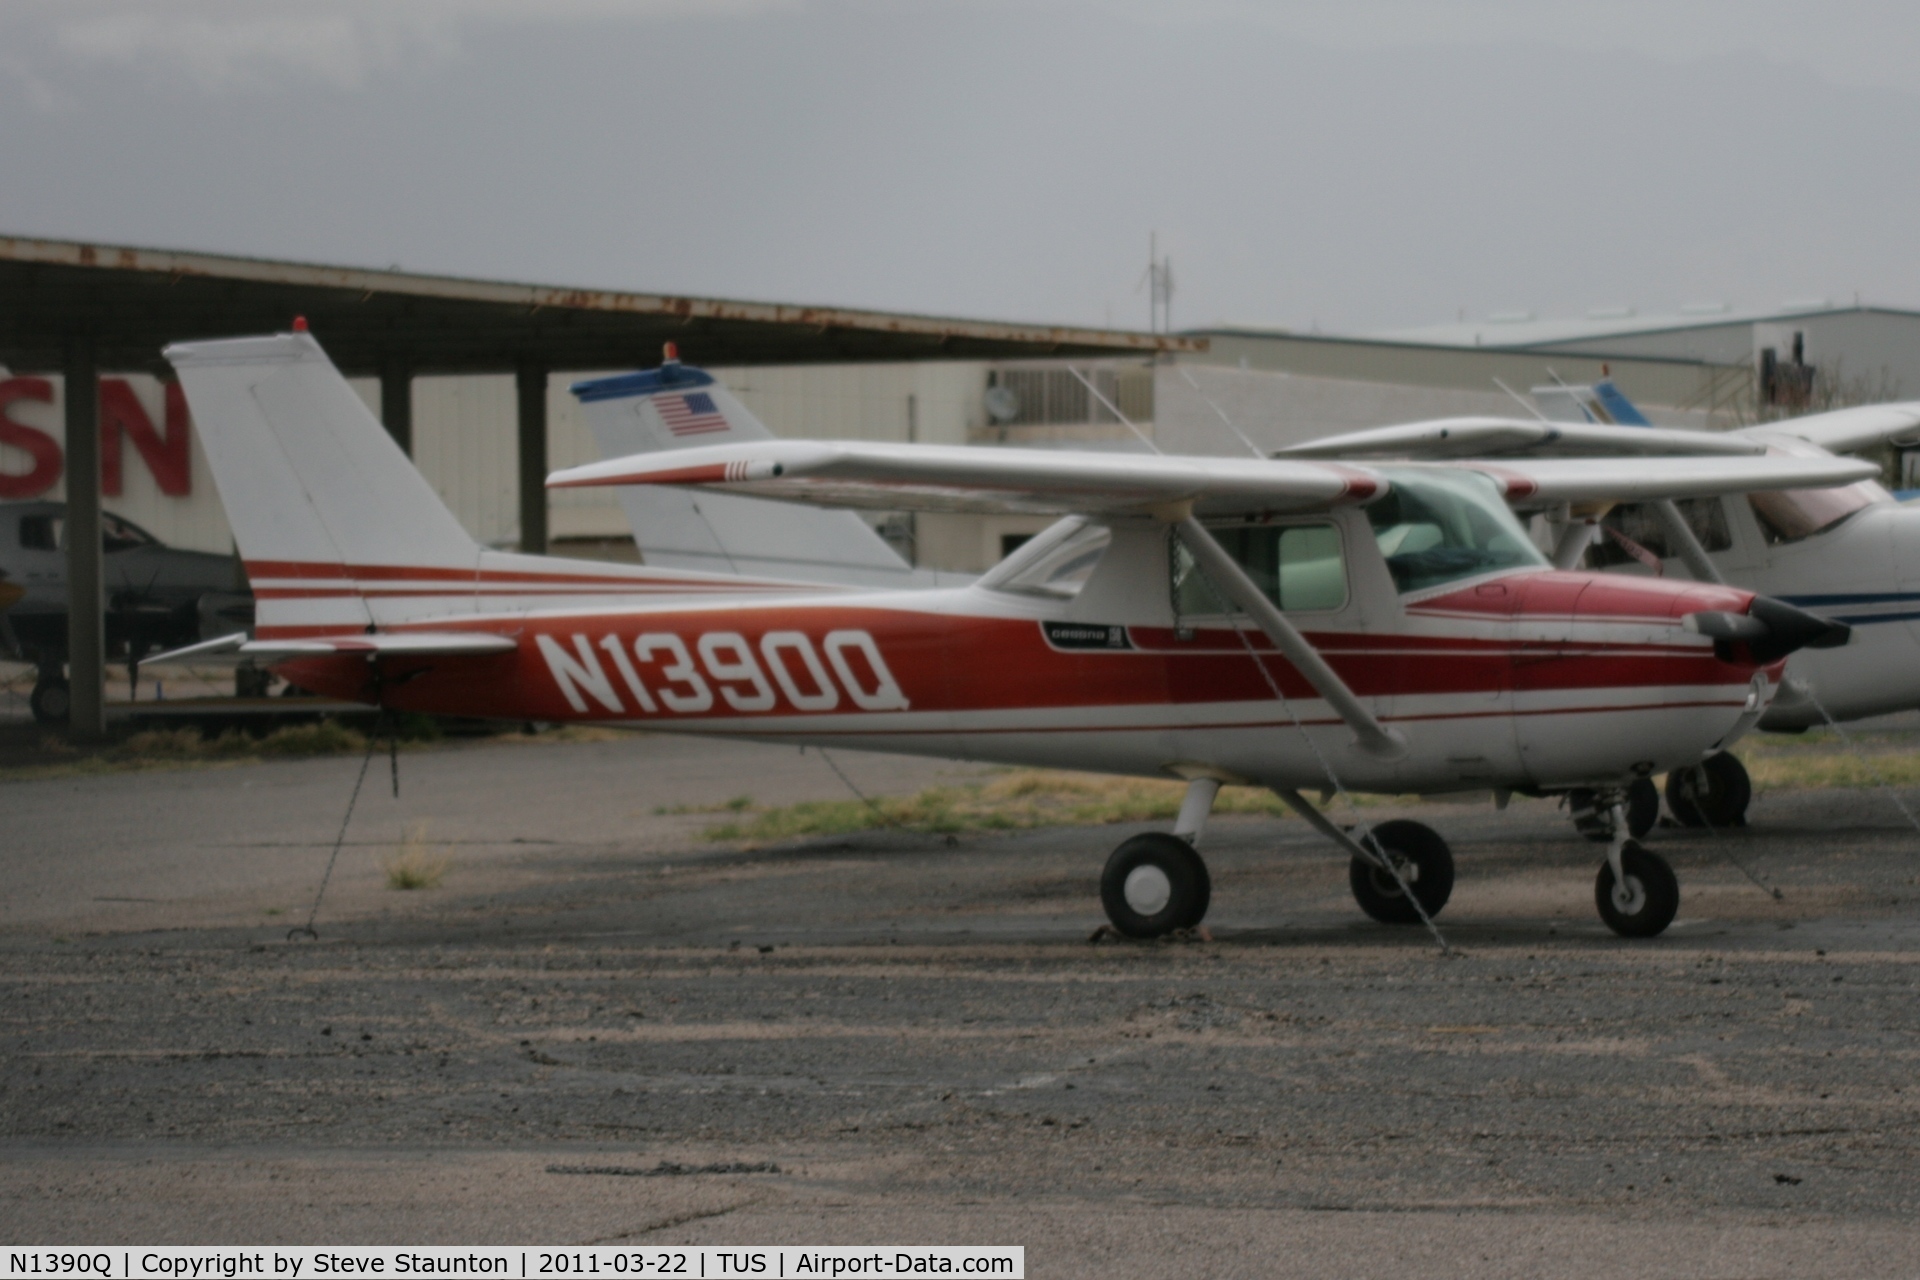 N1390Q, 1971 Cessna 150L C/N 15072690, Taken at Tucson International Airport, in March 2011 whilst on an Aeroprint Aviation tour